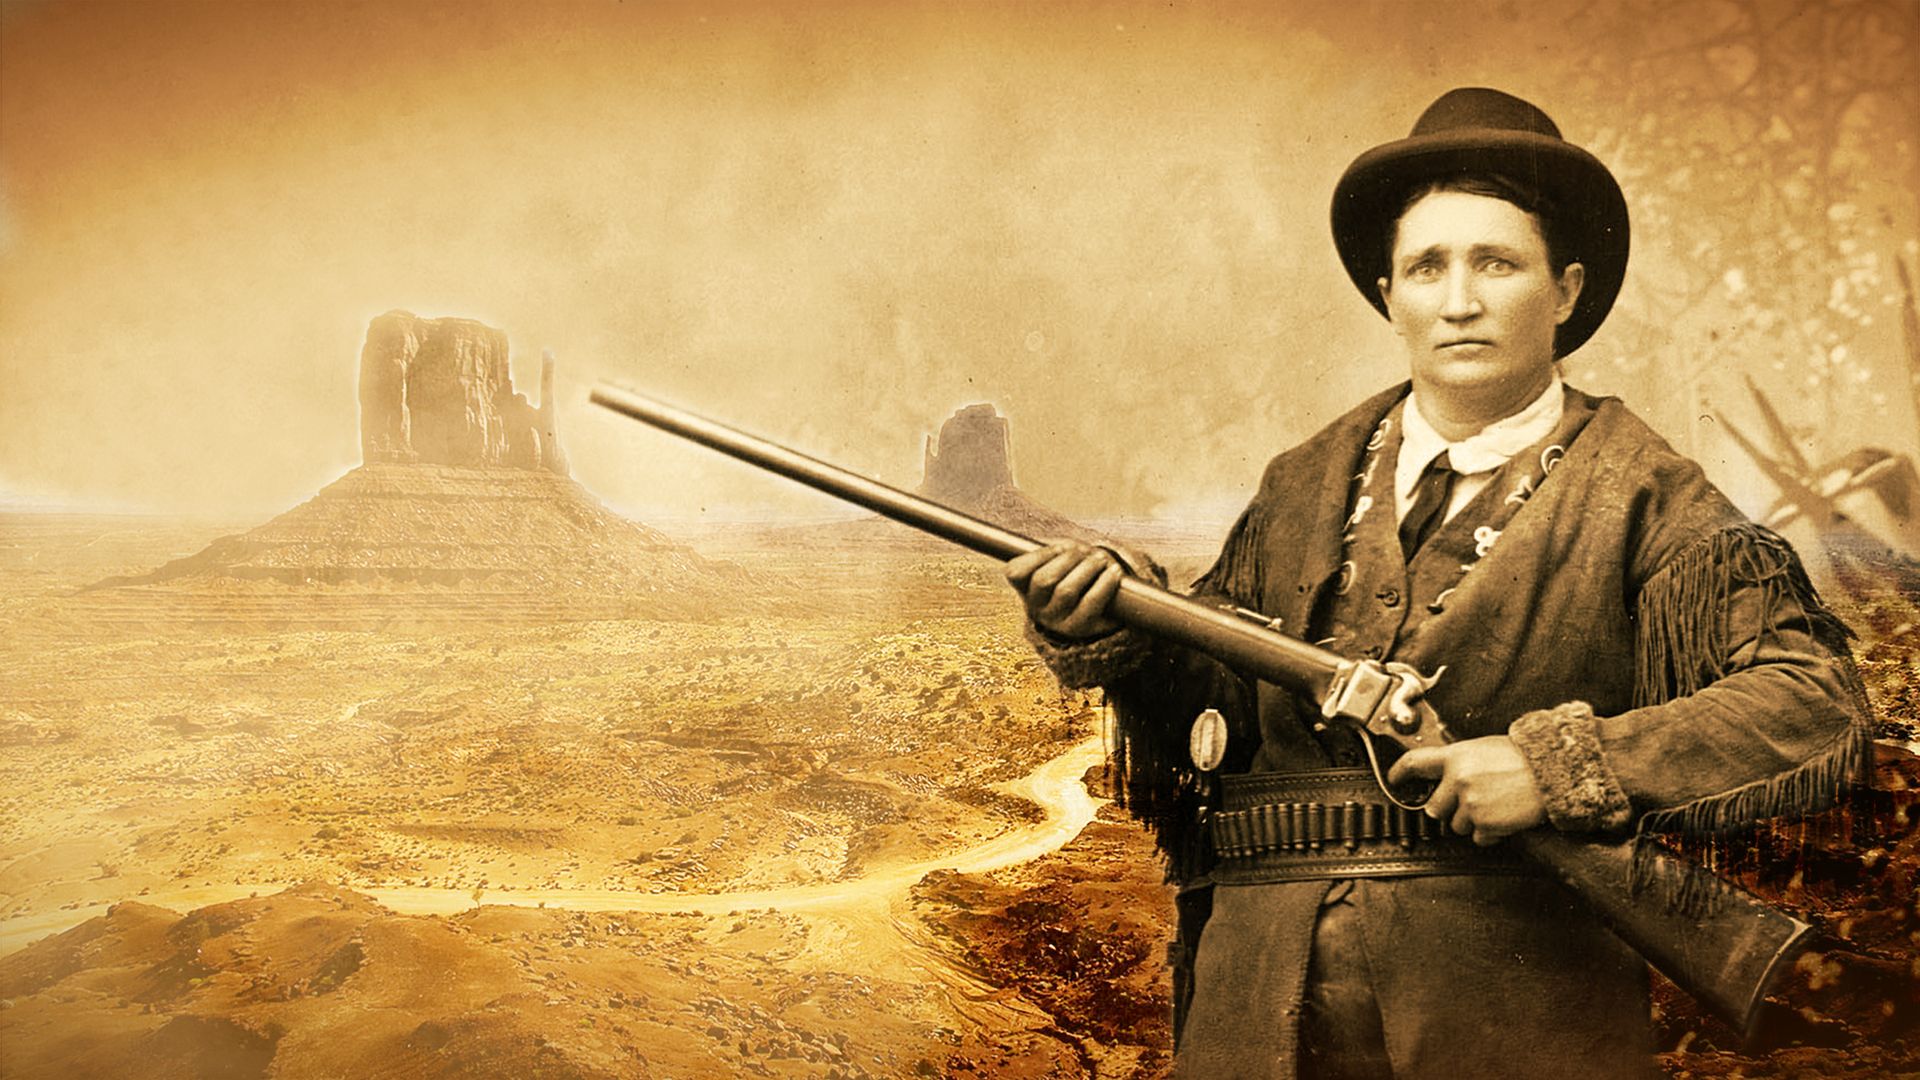 Calamity Jane: Legend of The West Backdrop